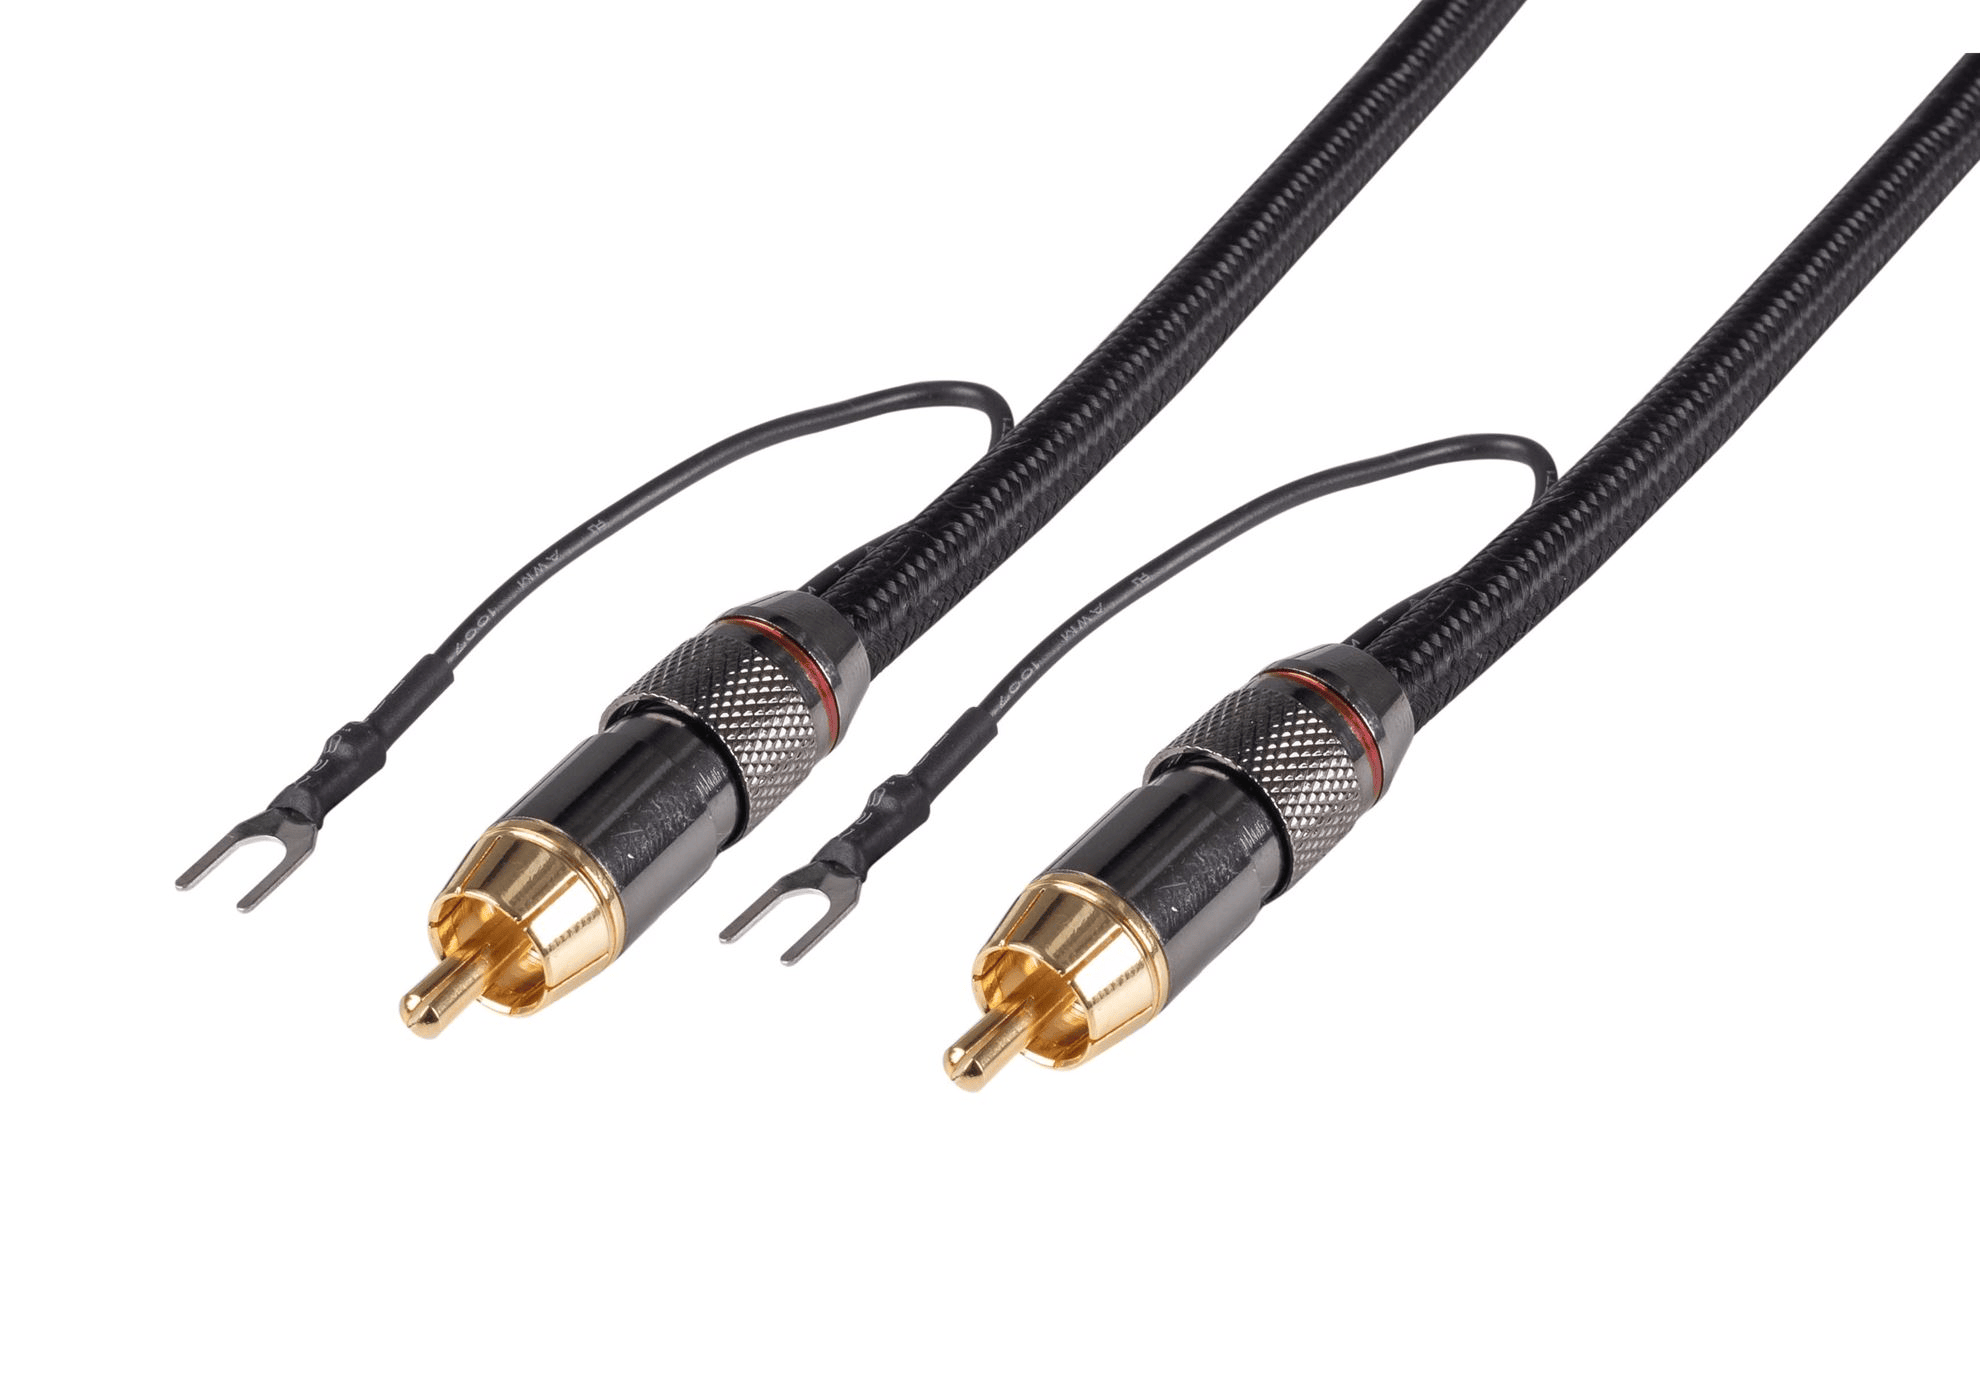 Buy the Dynamix CA-SUBG-3 3M Coaxial Subwoofer Cable RCA Male to